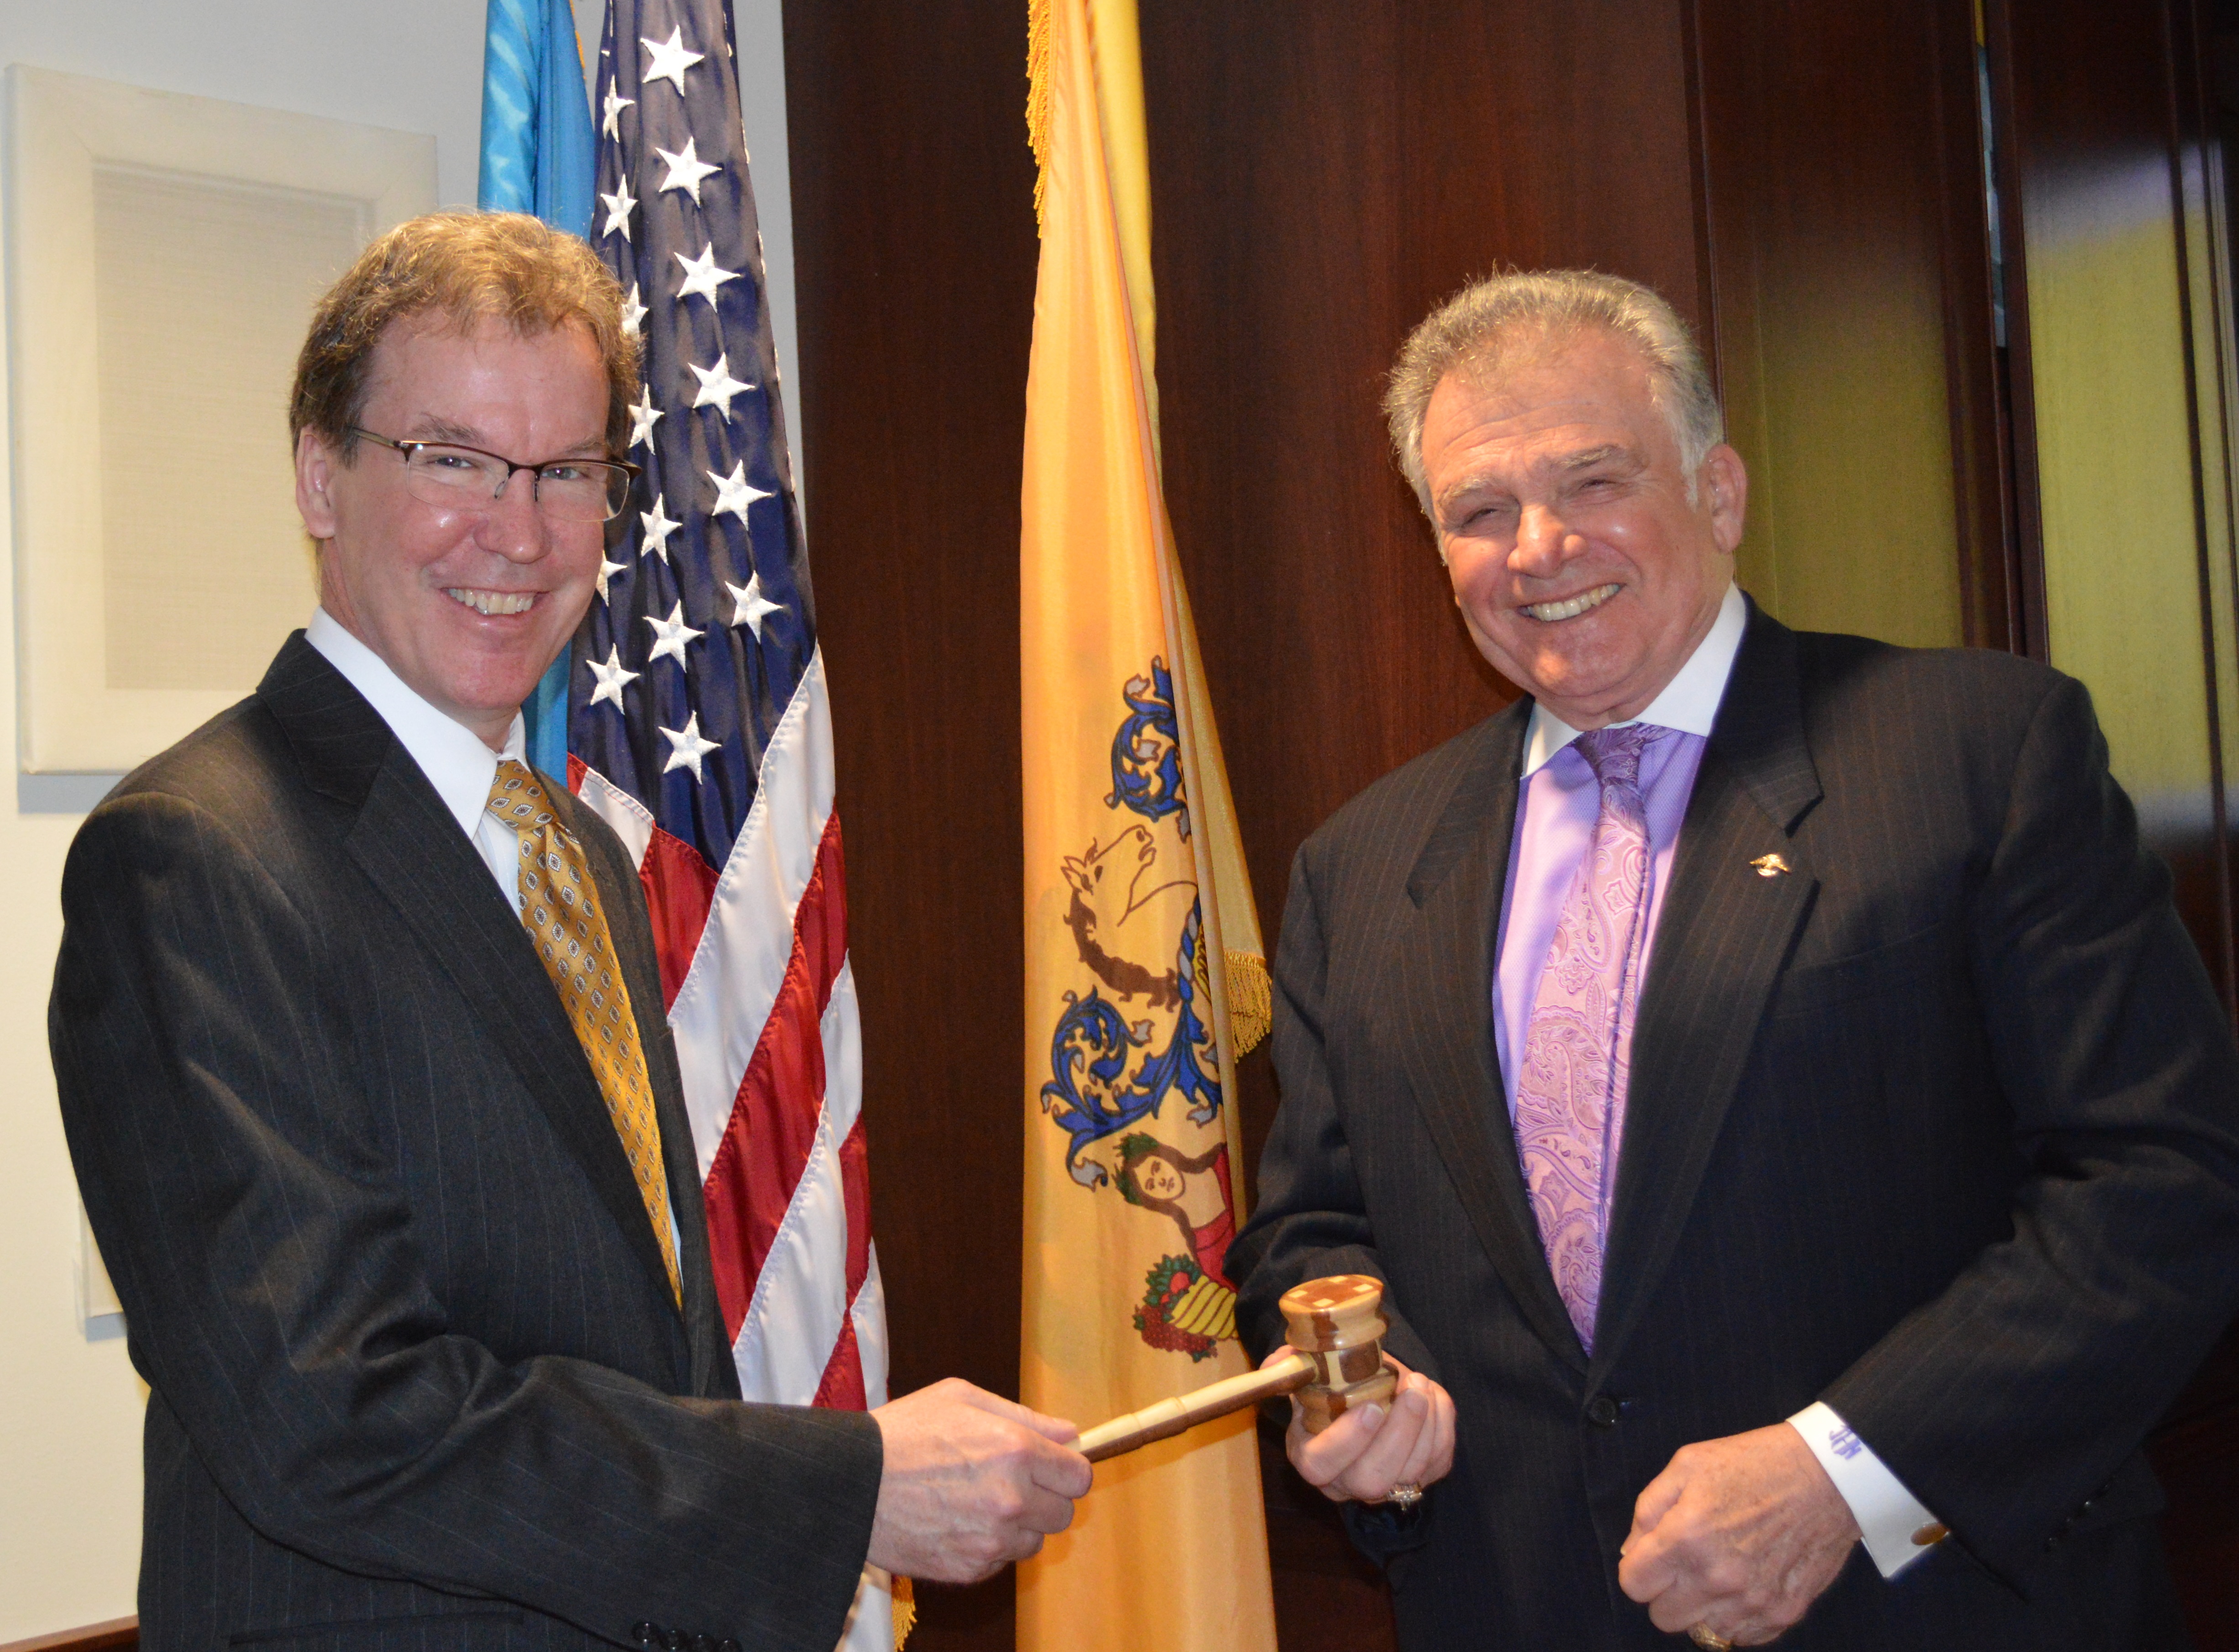 Bill Lowe (pictured left) congratulates Jim Hogan on his election as Commission Chairman and presents him with the meeting gavel. 